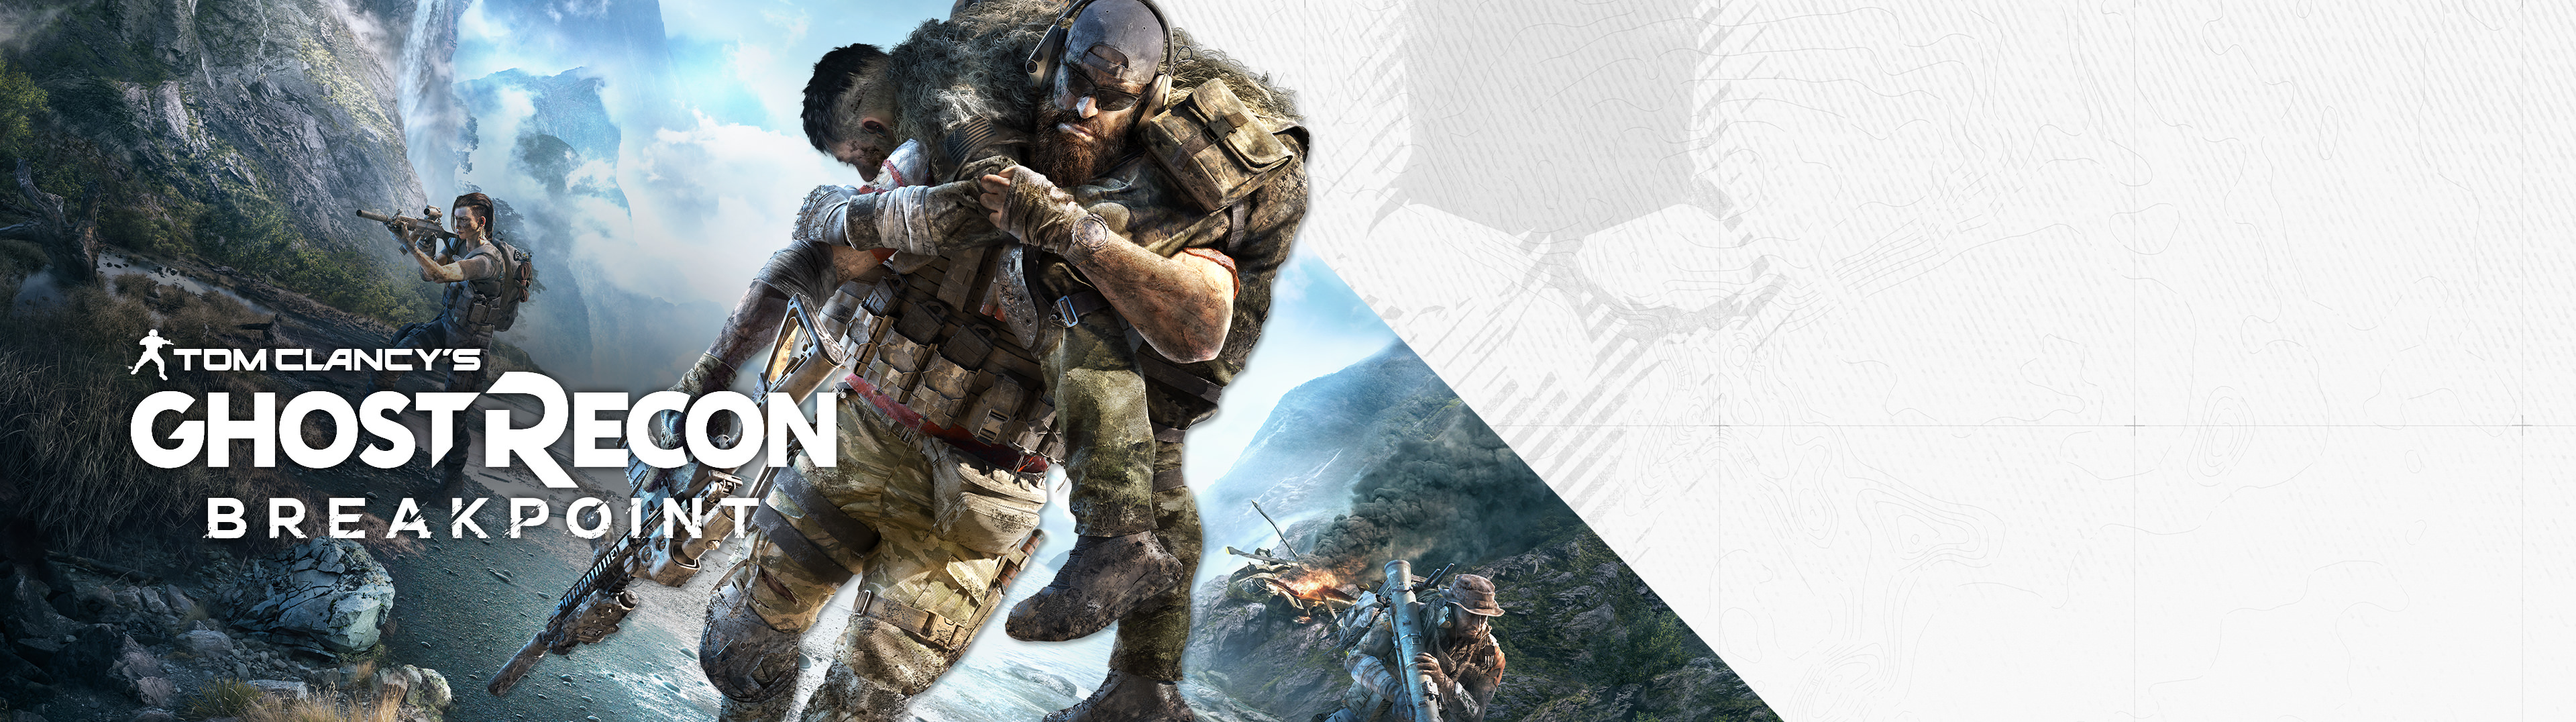 Buy Tom Clancy's Ghost Recon Breakpoint